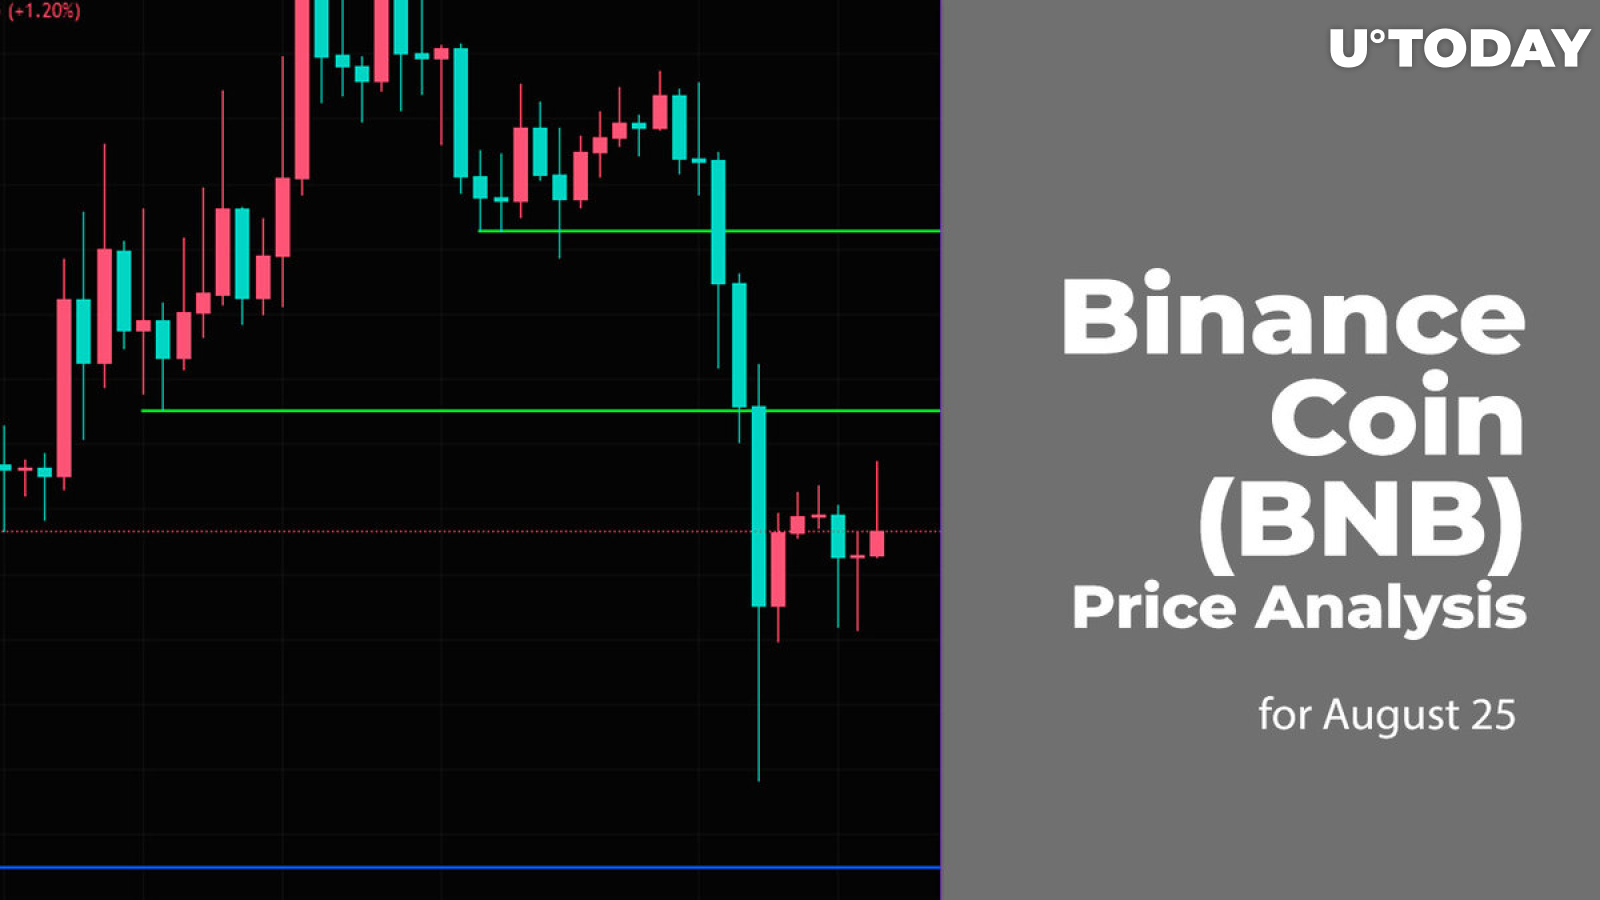 Binance Coin (BNB) Price Analysis for August 25